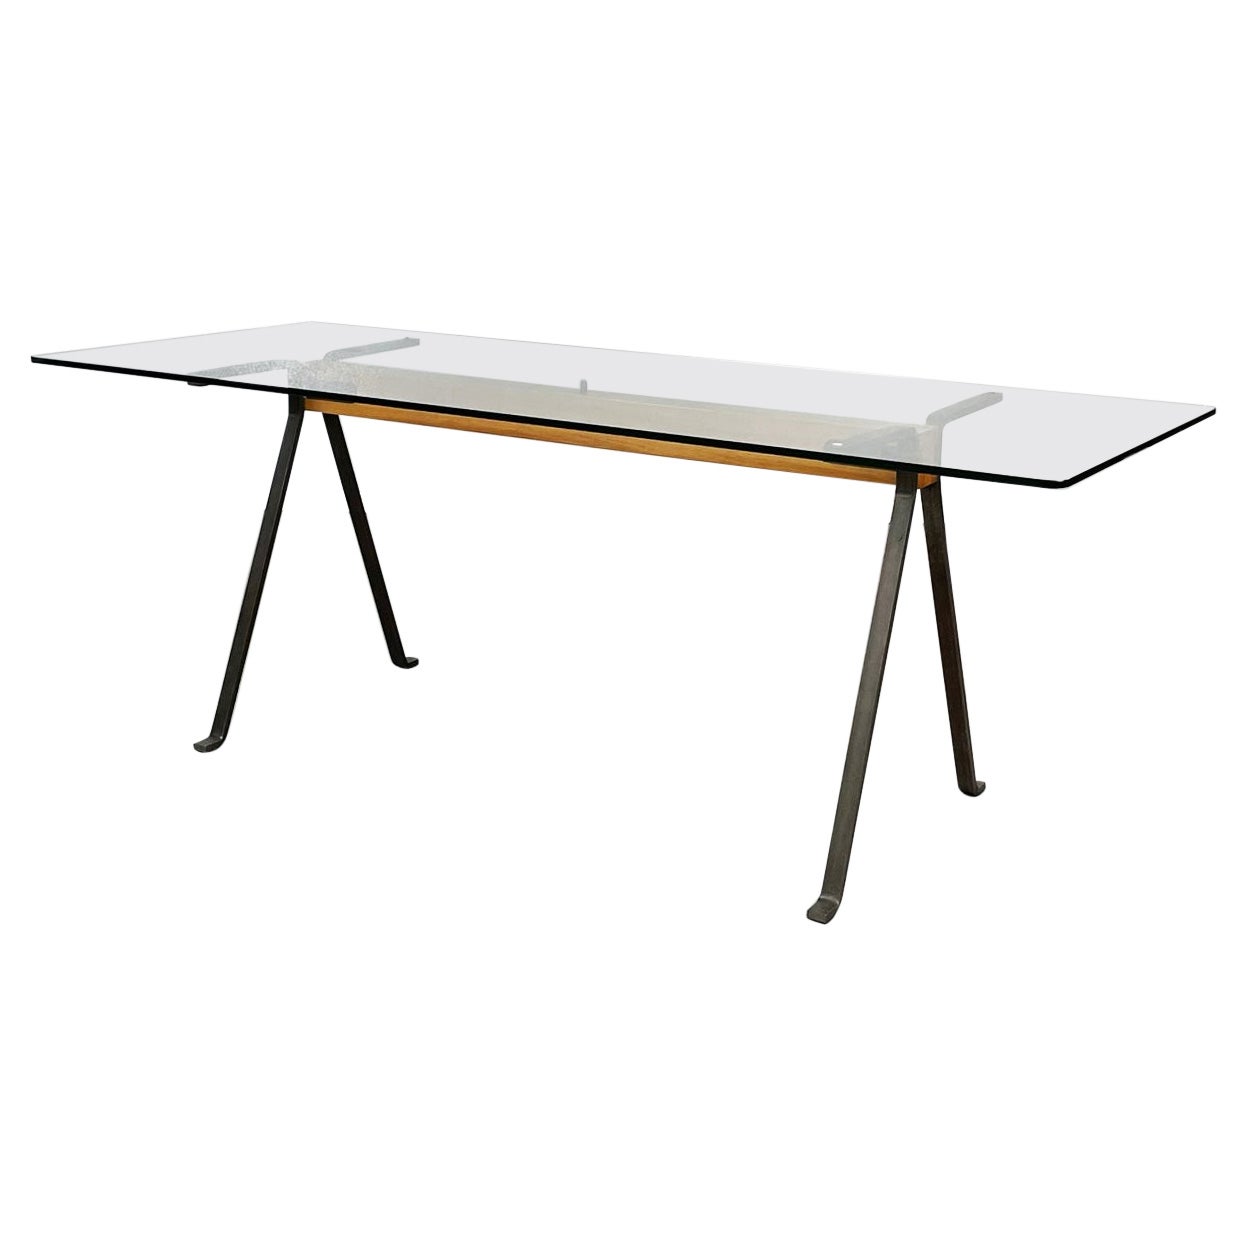 Italian Modern Glass Wood Steel Dining Table Frate by Enzo Mari for Driade, 1973 For Sale